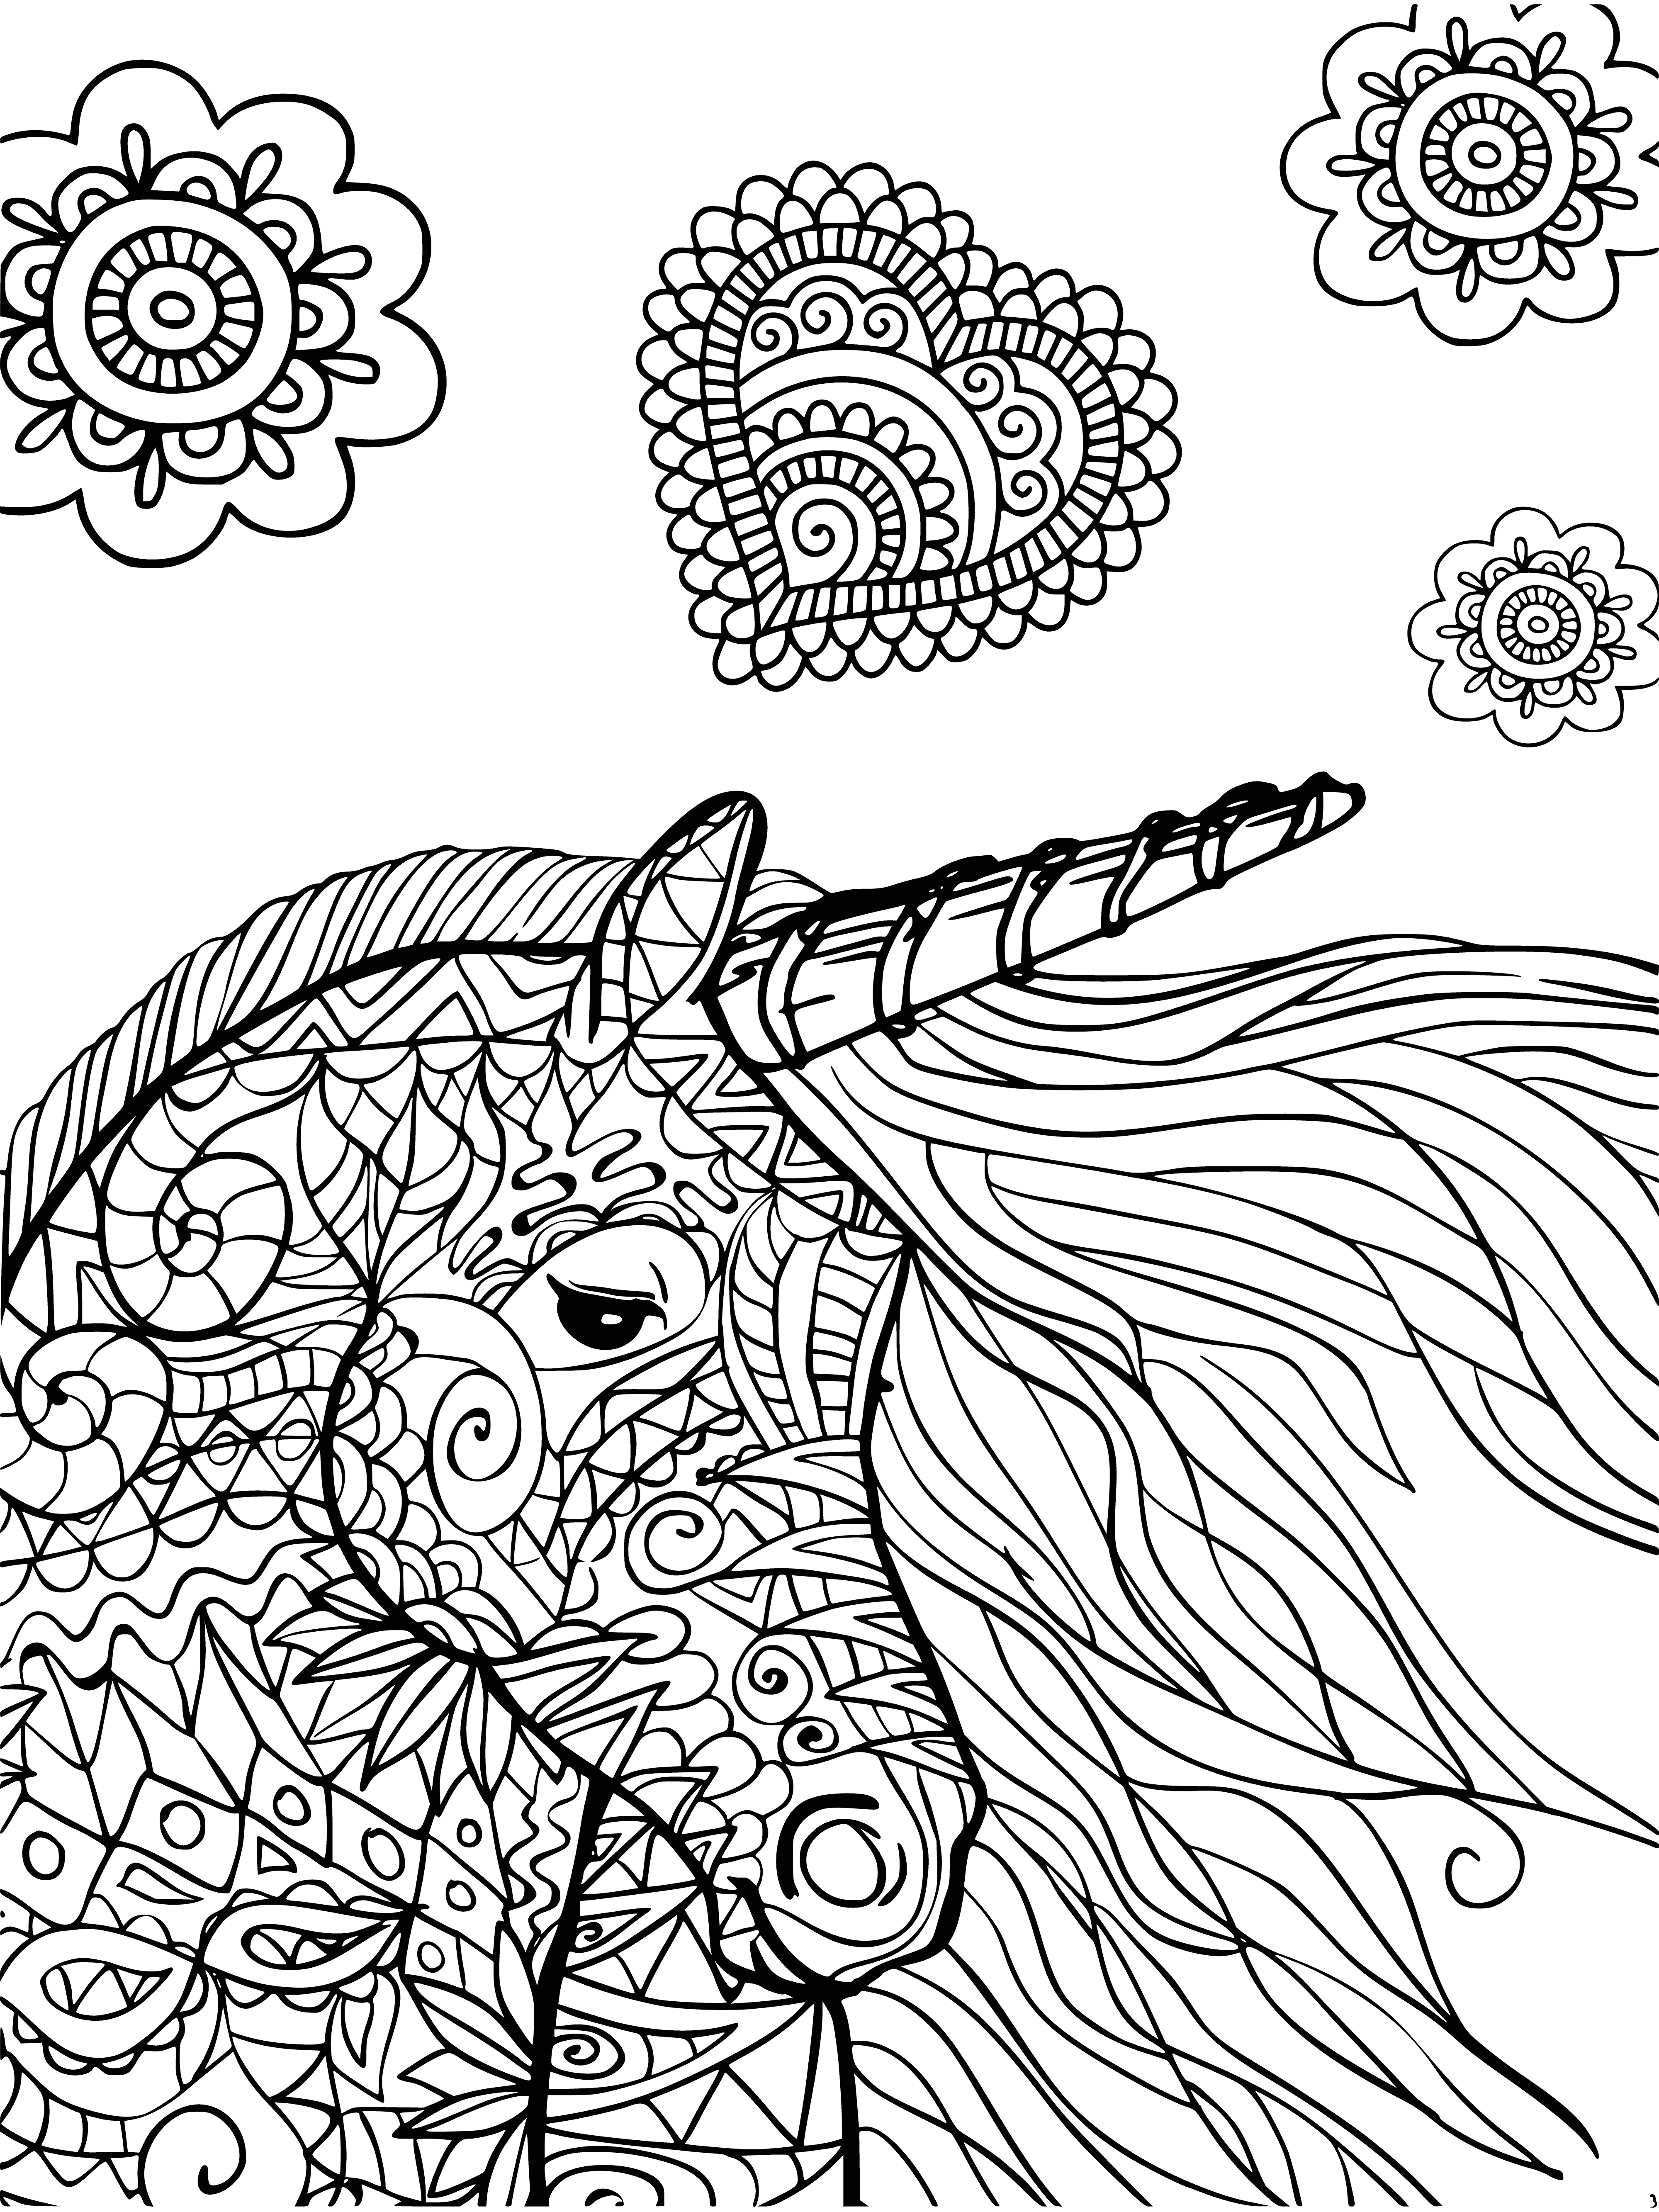 coloring page: Unicorns surrounded by a field of blooming flowers, majestic creature with spiraling horn and pure white mane and tail.